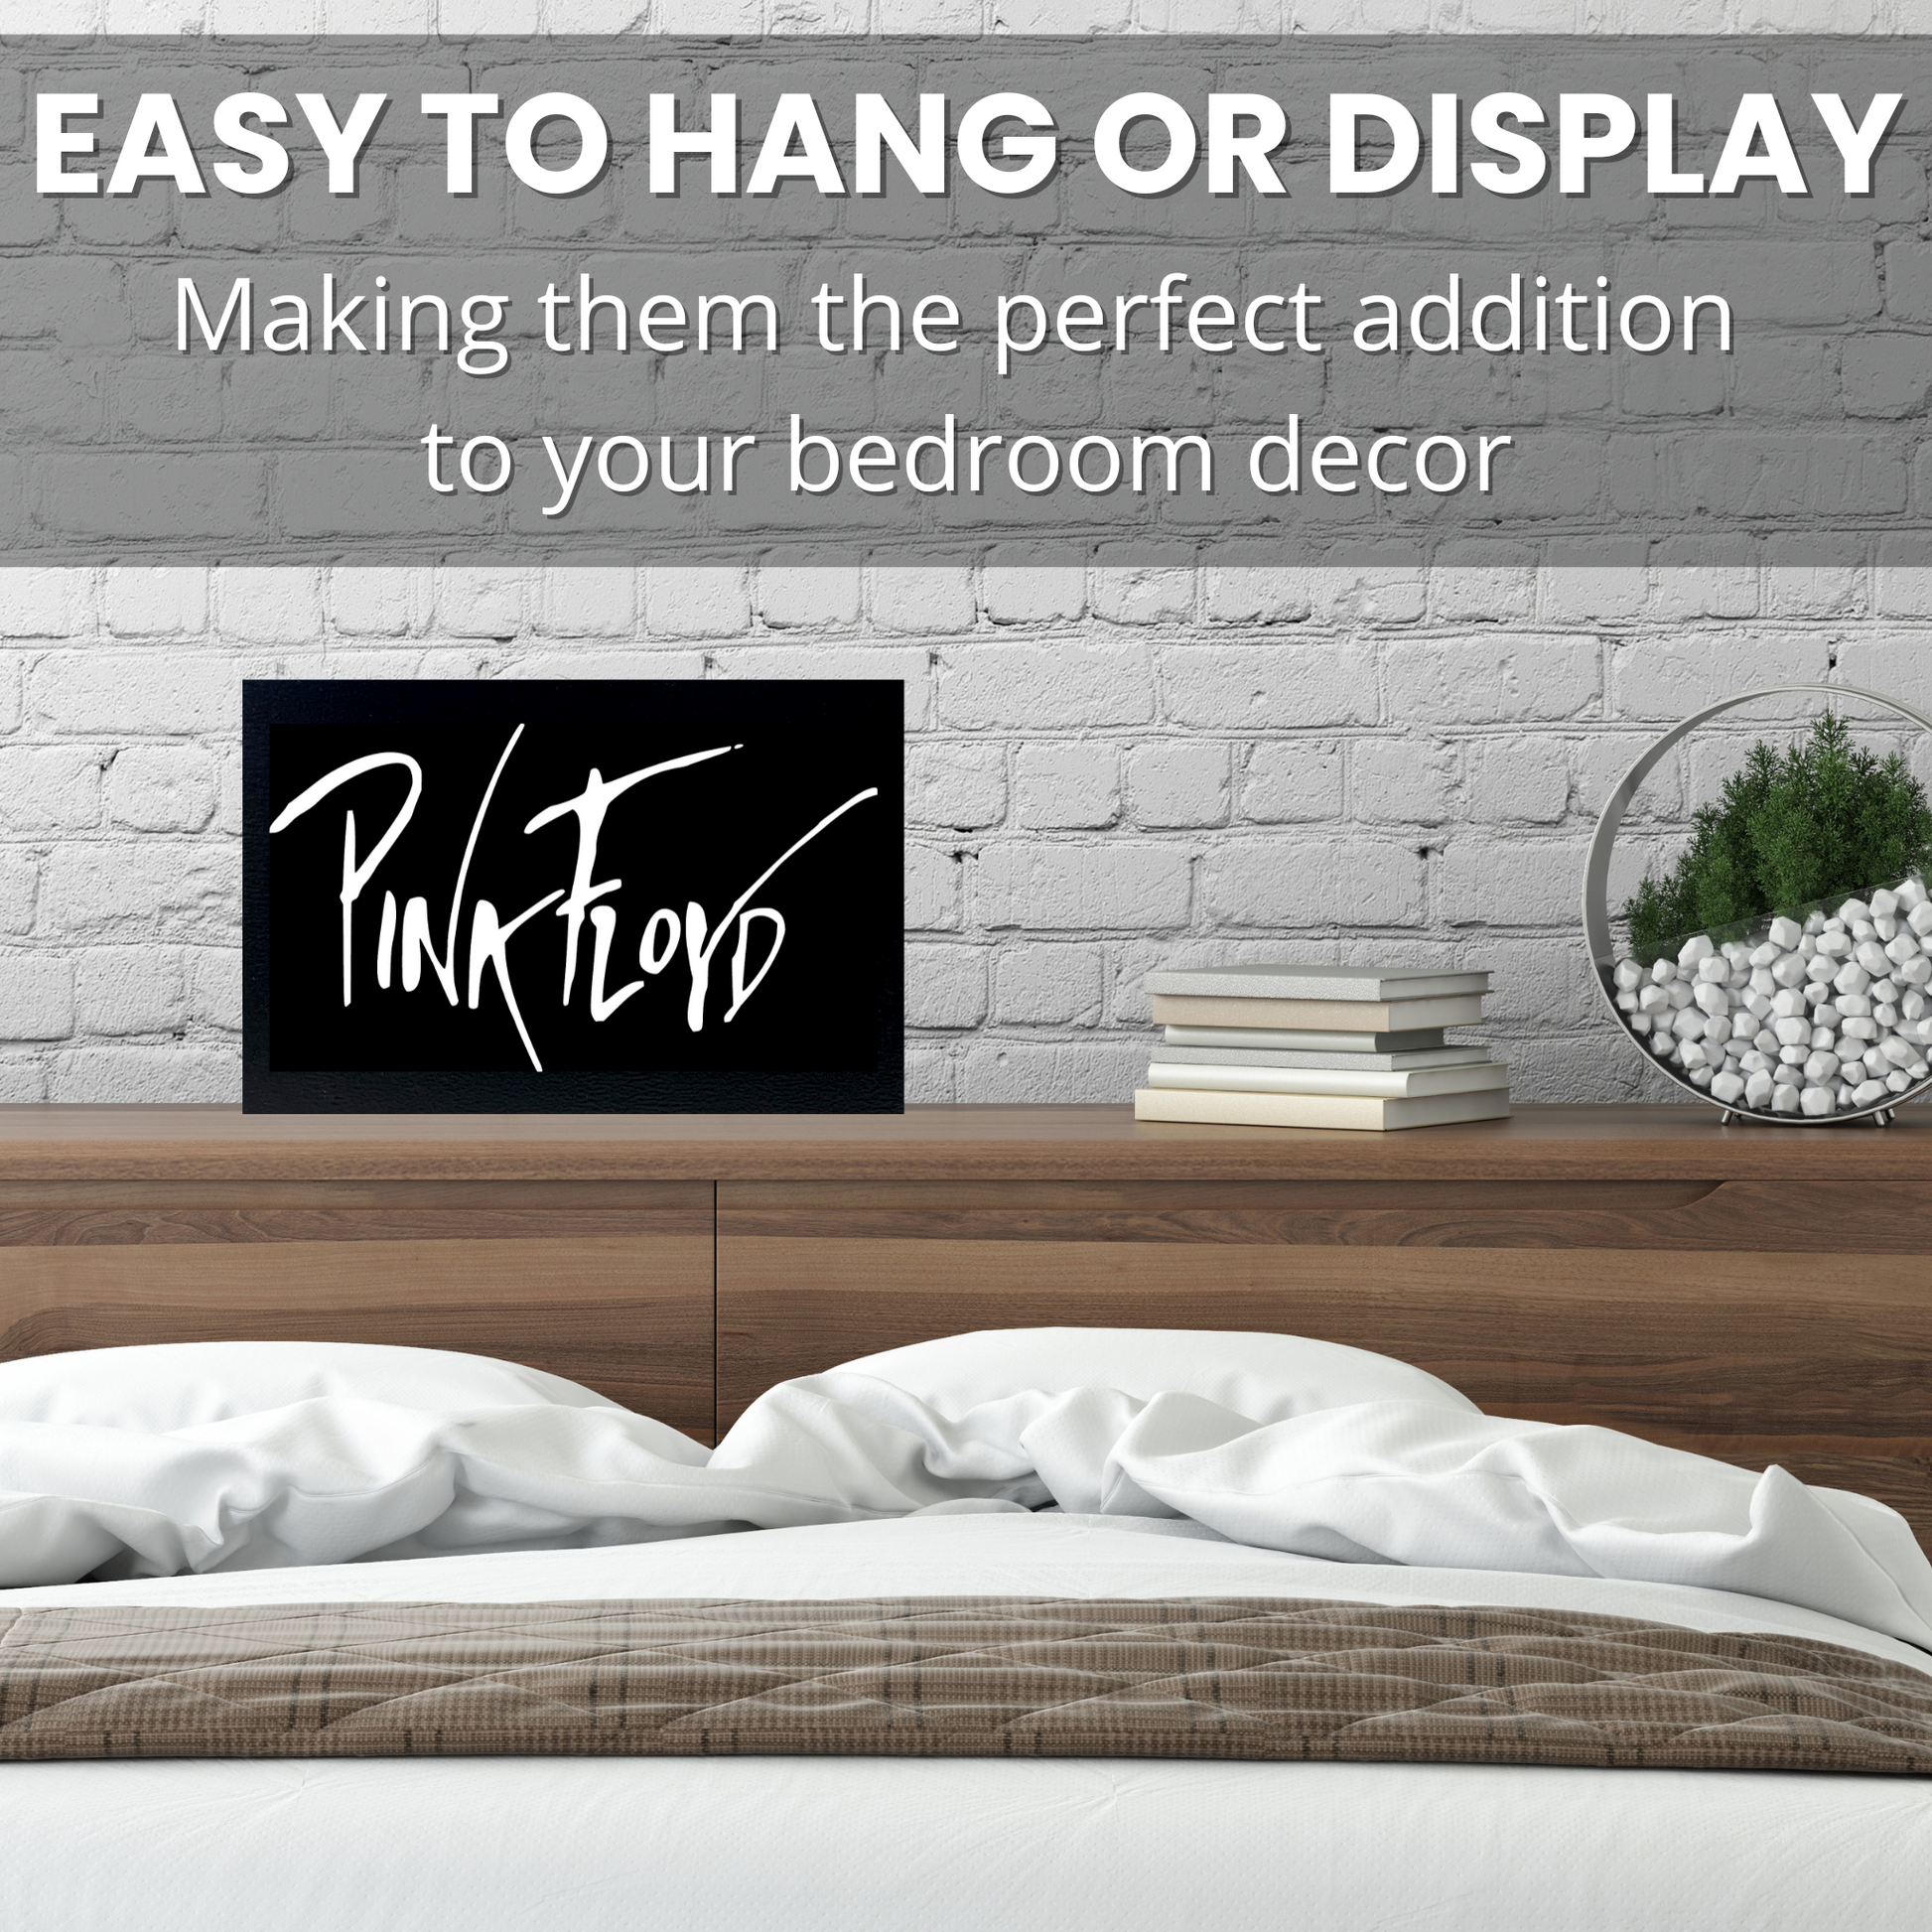 Pink Floyd The Wall Art Script Sign for bedroom